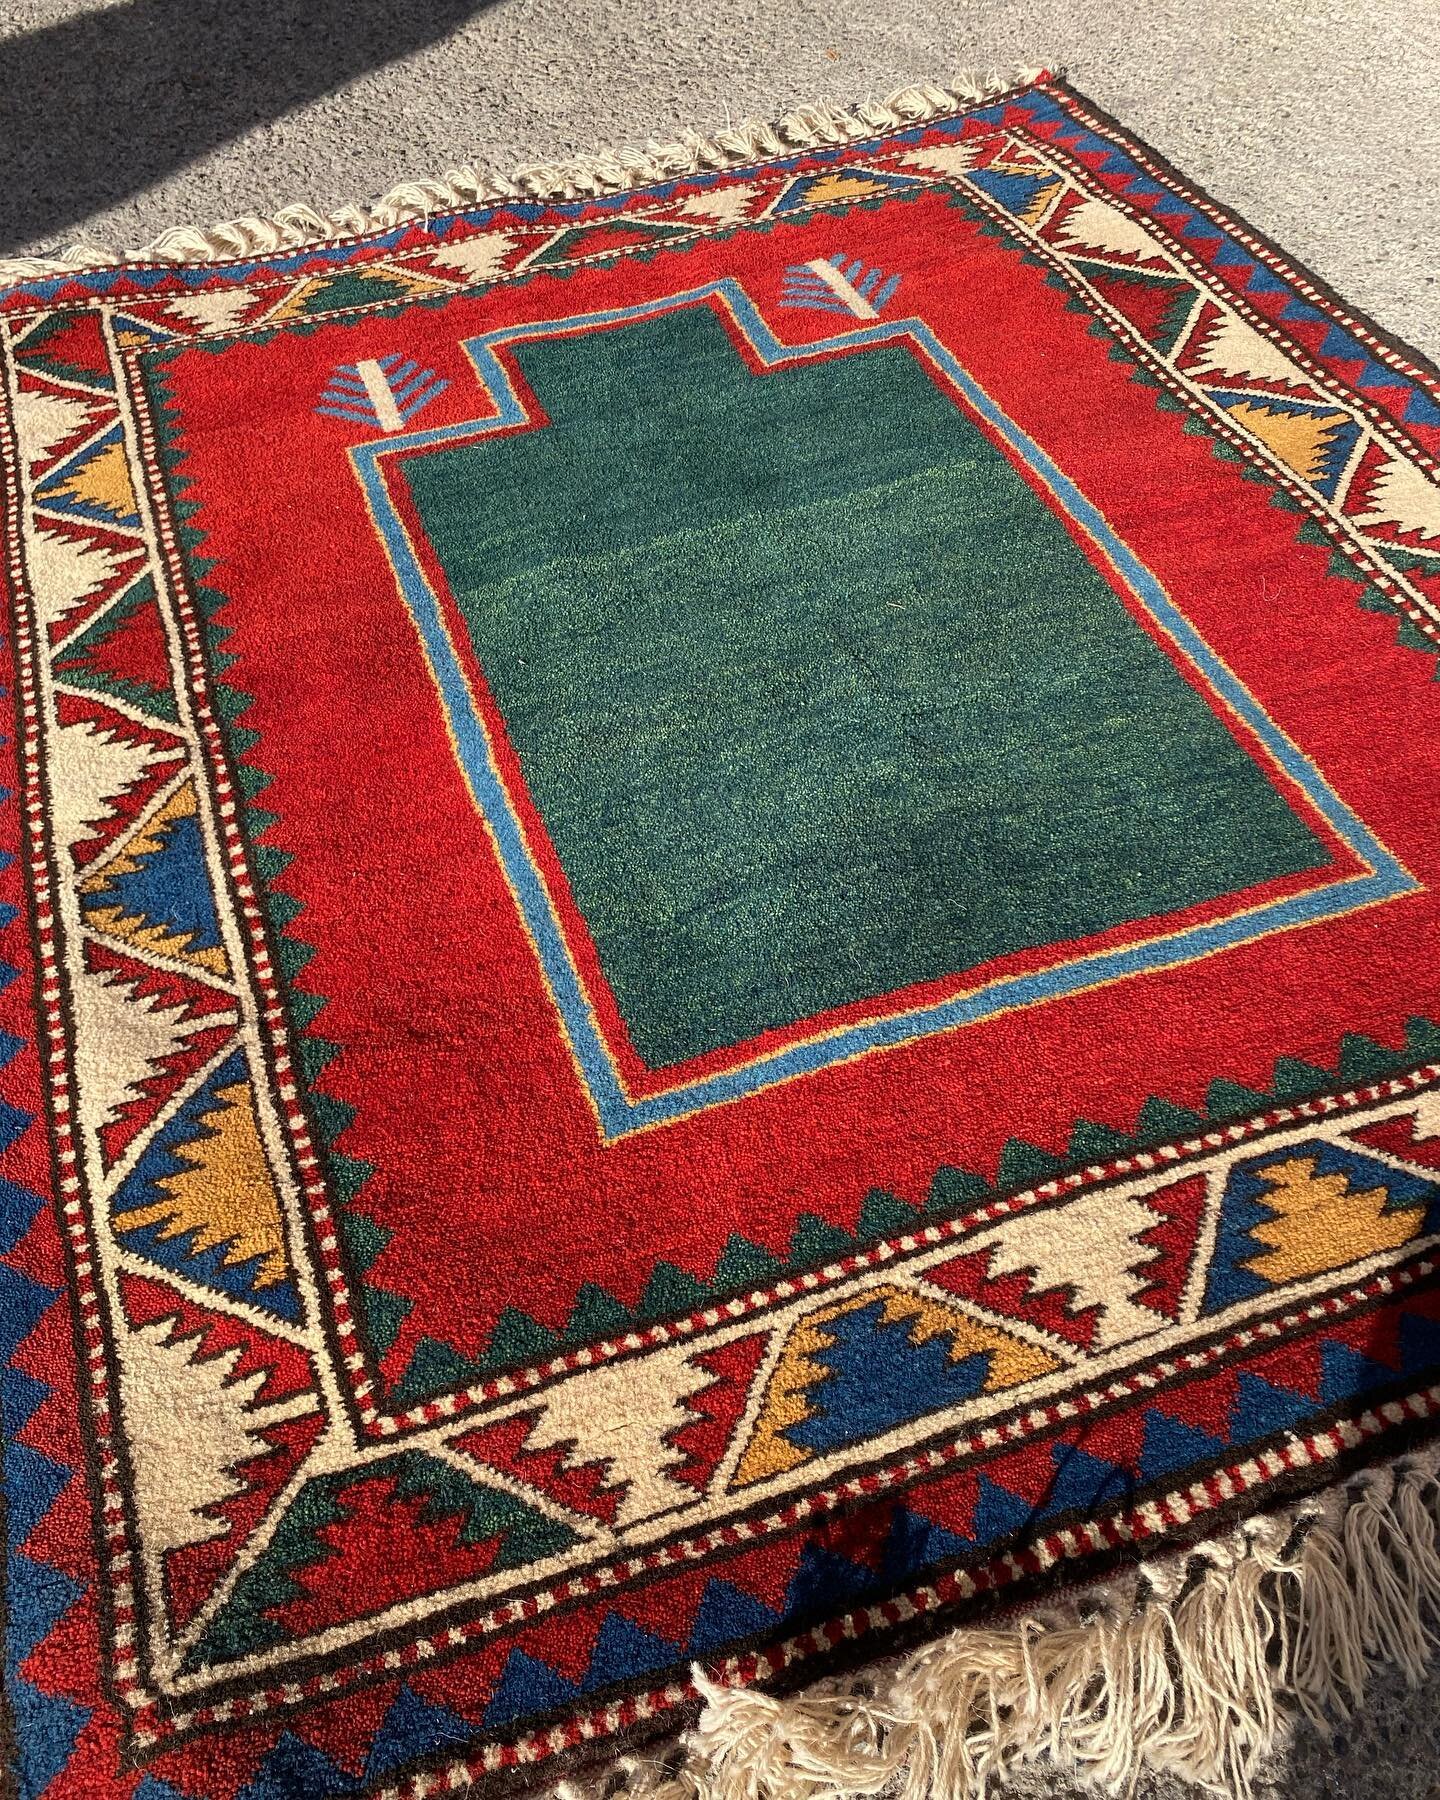 A classic design - our super elegant Fachralo prayer rug (just sold 💚) woven with a minimalist emerald green field